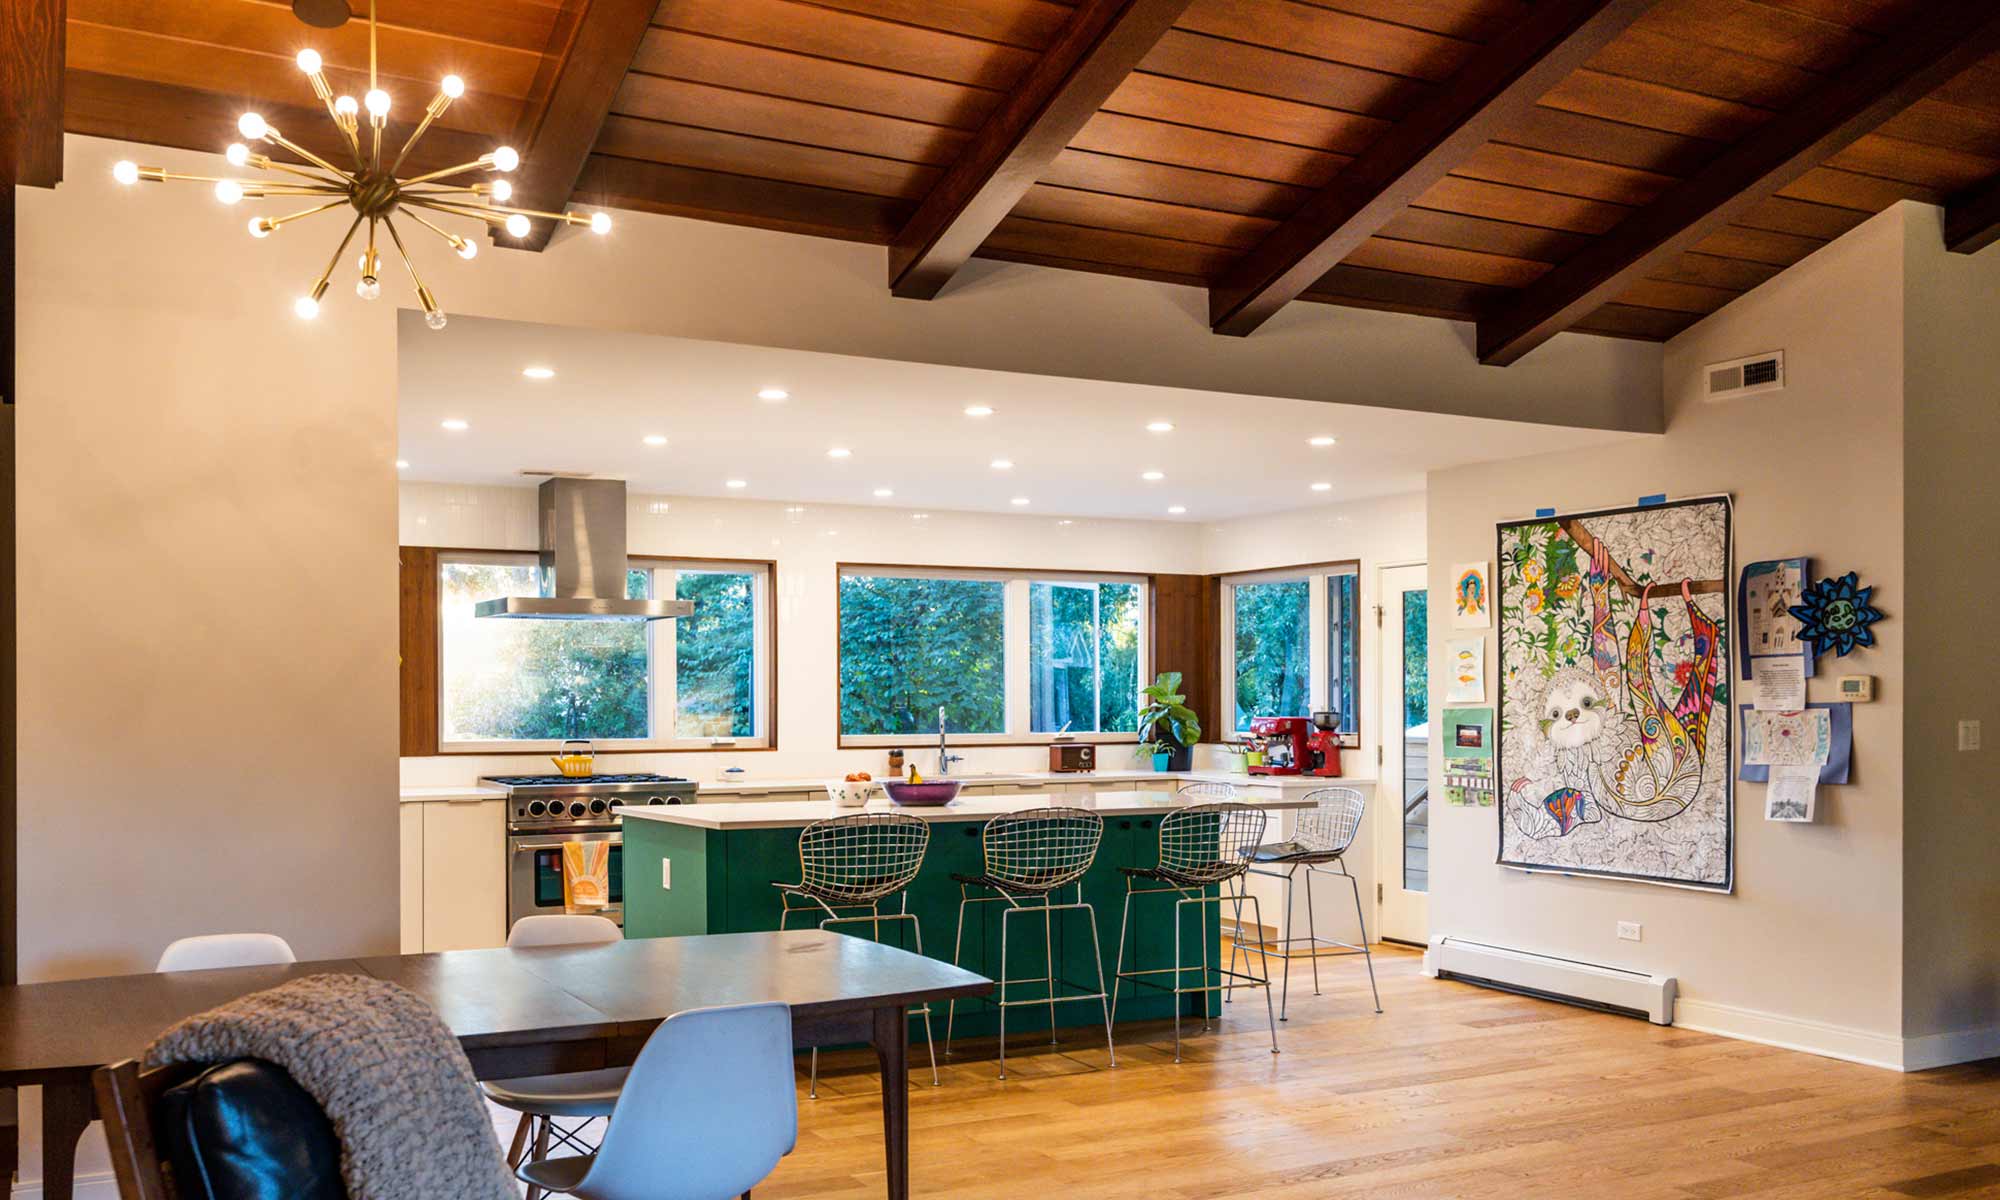 home renovation exposed beams in living room recess lighting in kitchen large green island